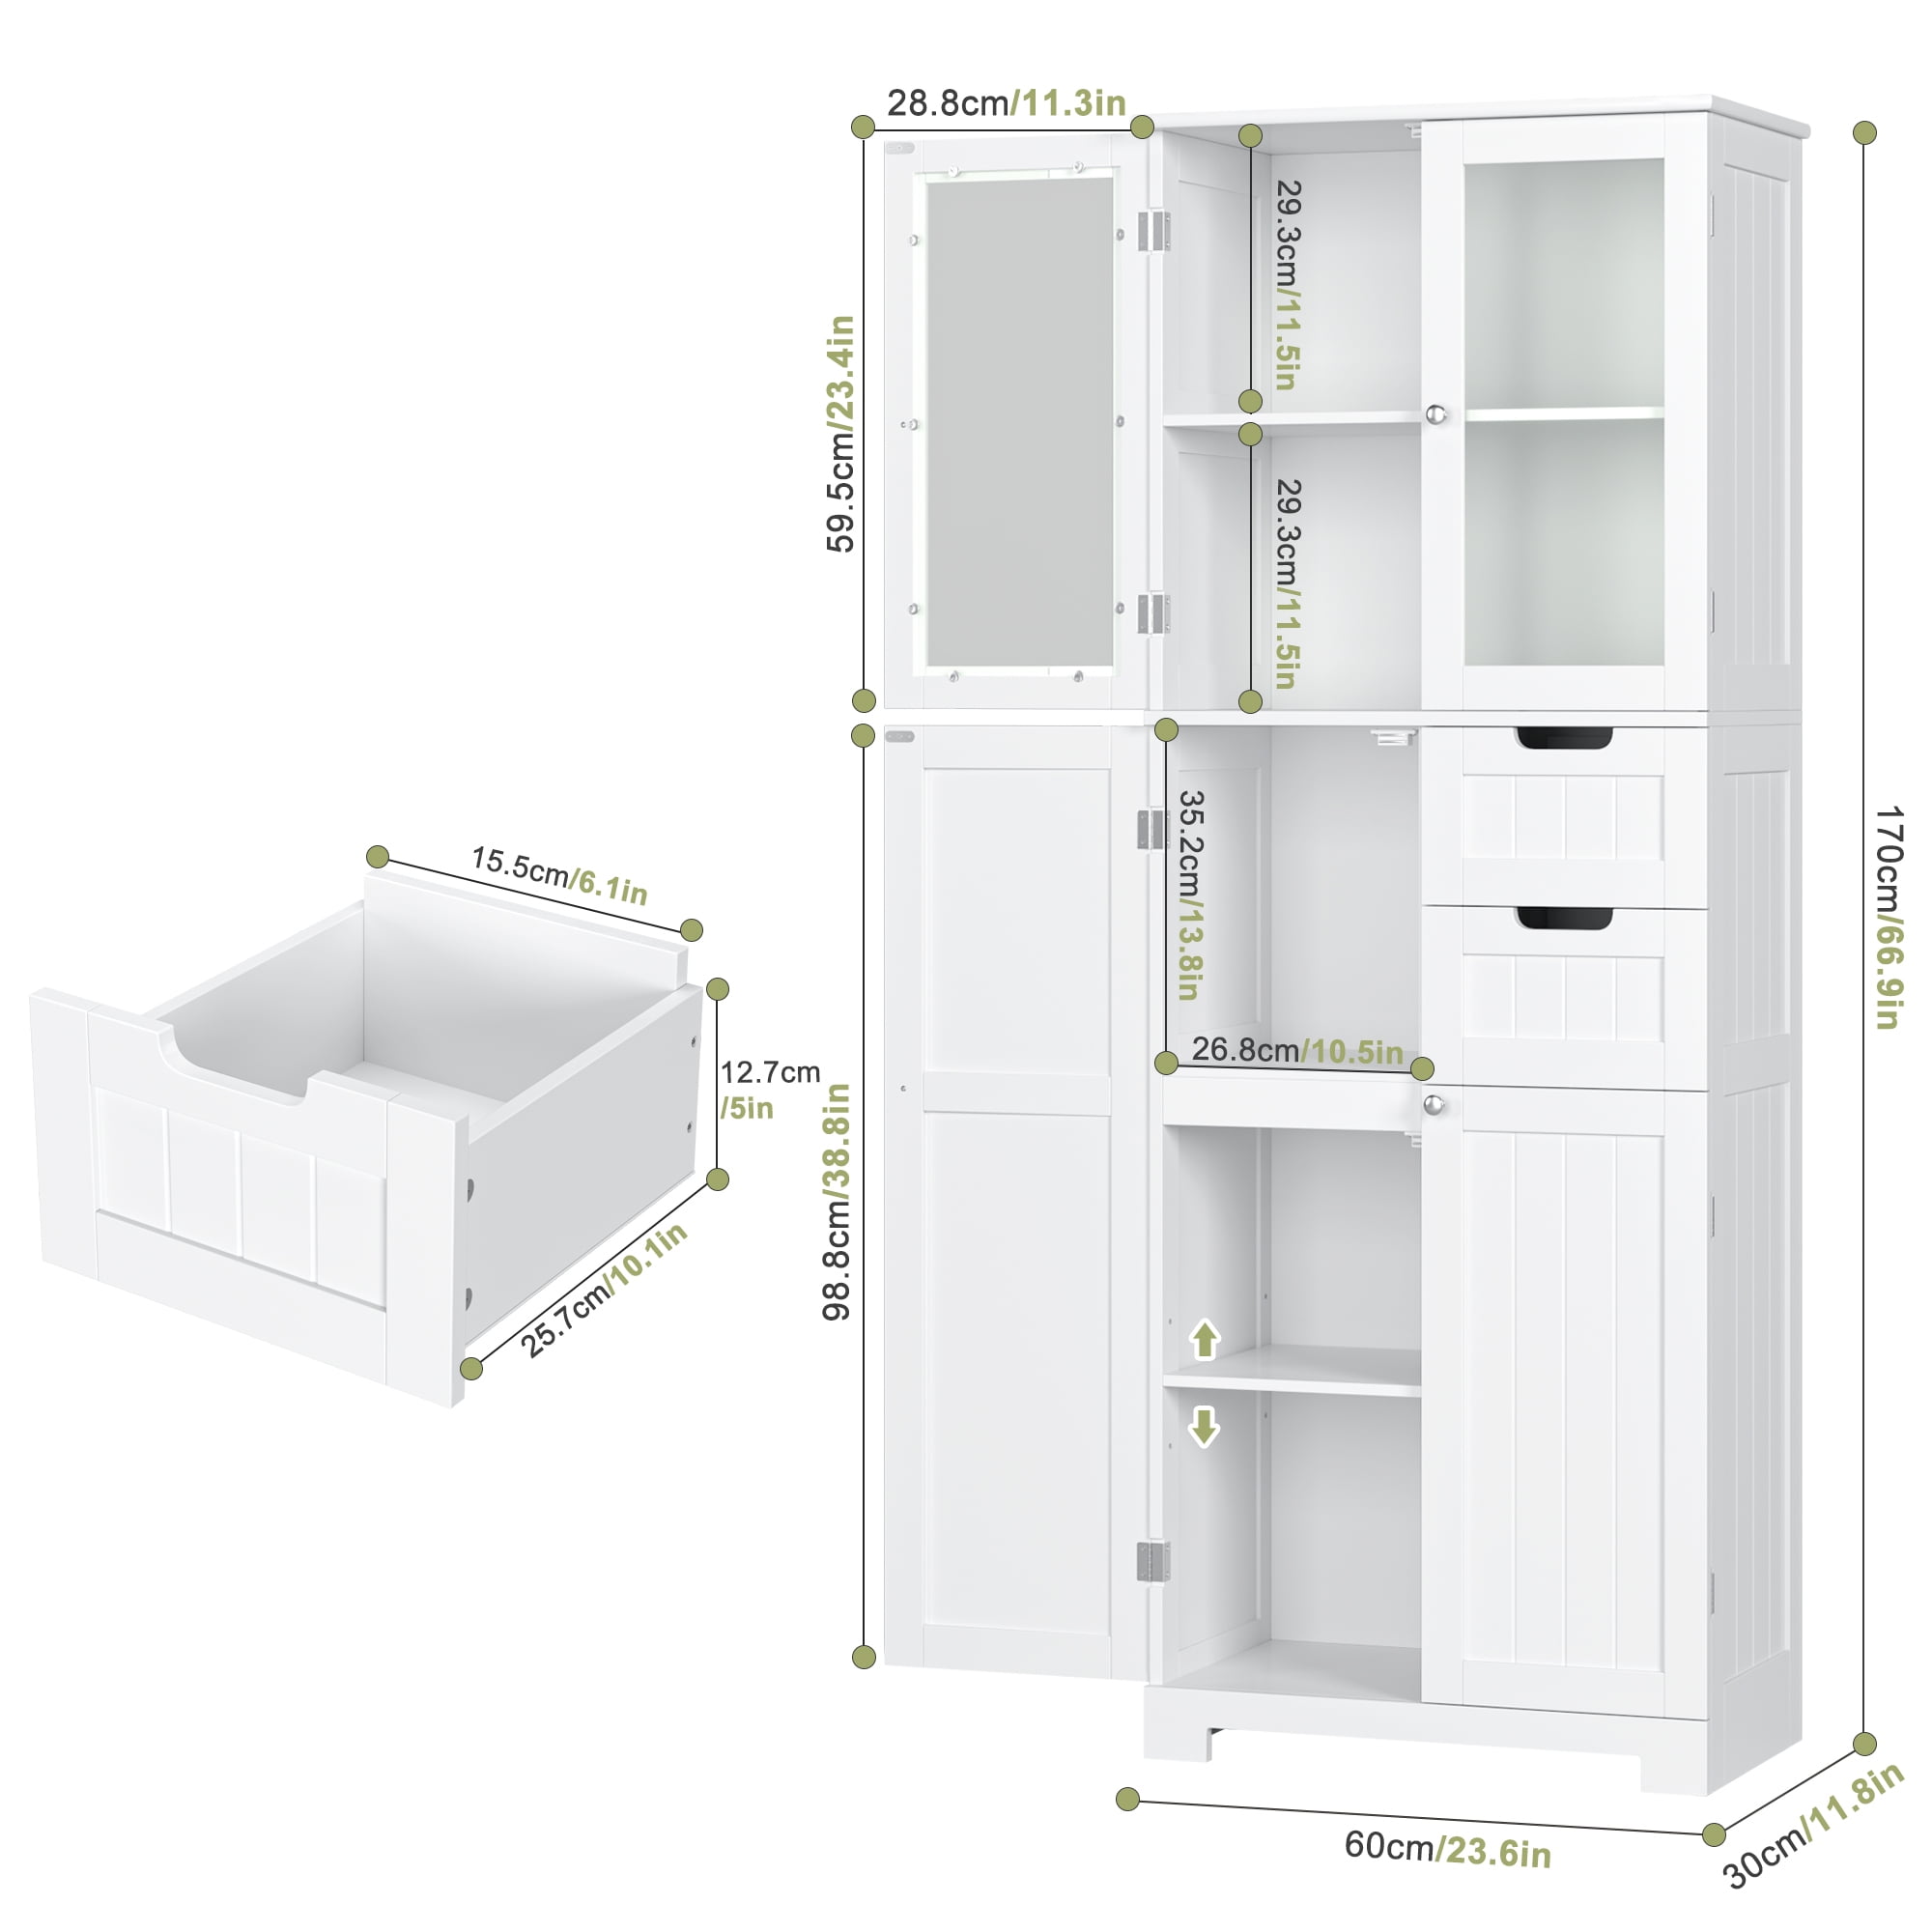 Homfa 4 Doors Linen Storage Cabinet, 3-Tier Wood Tall Cabinet Cupboard with  2 Drawers for Living Room Bathroom, White